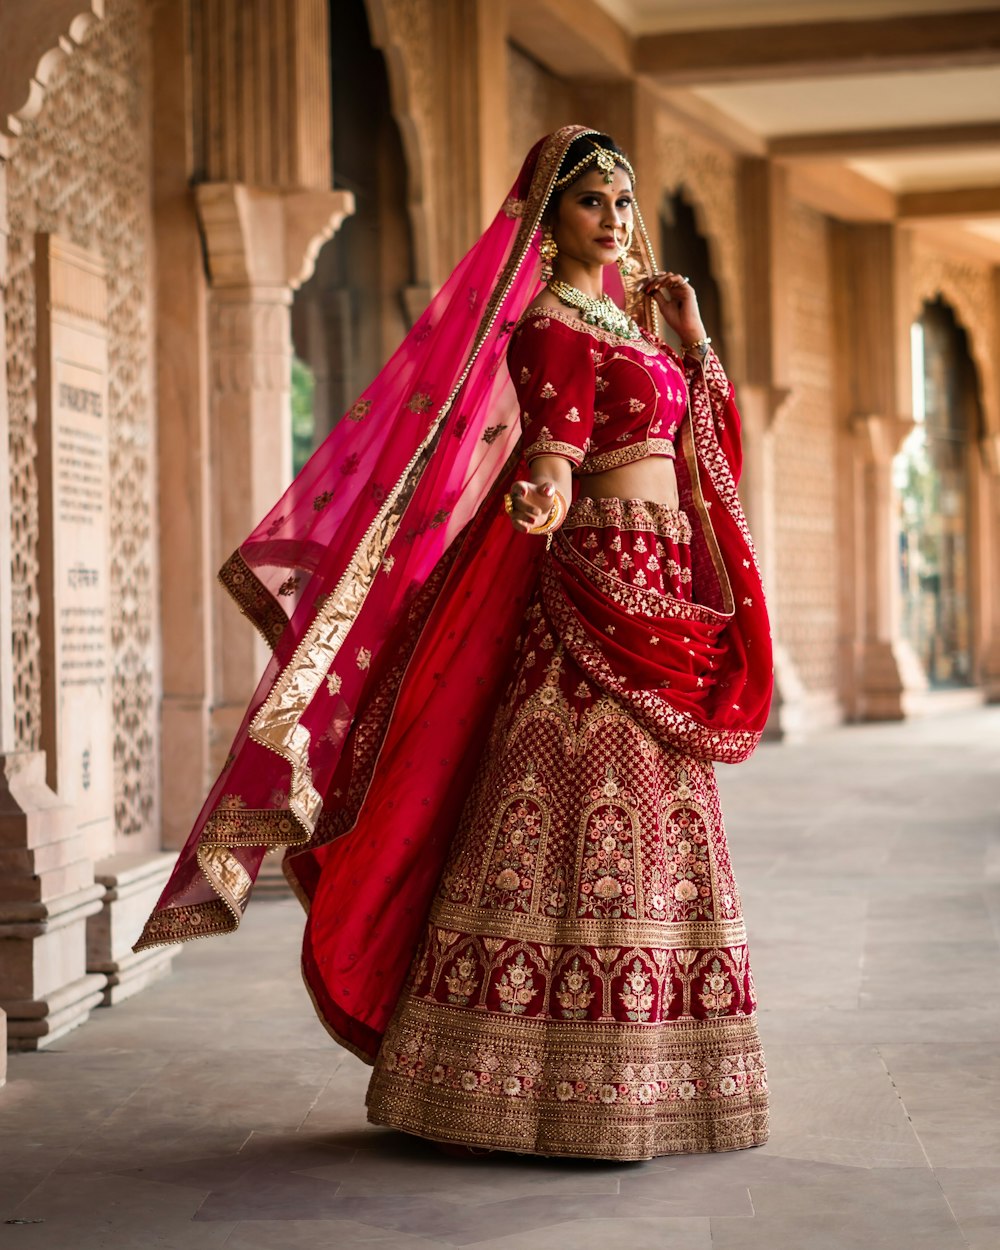 a woman in a red and gold bridal outfit